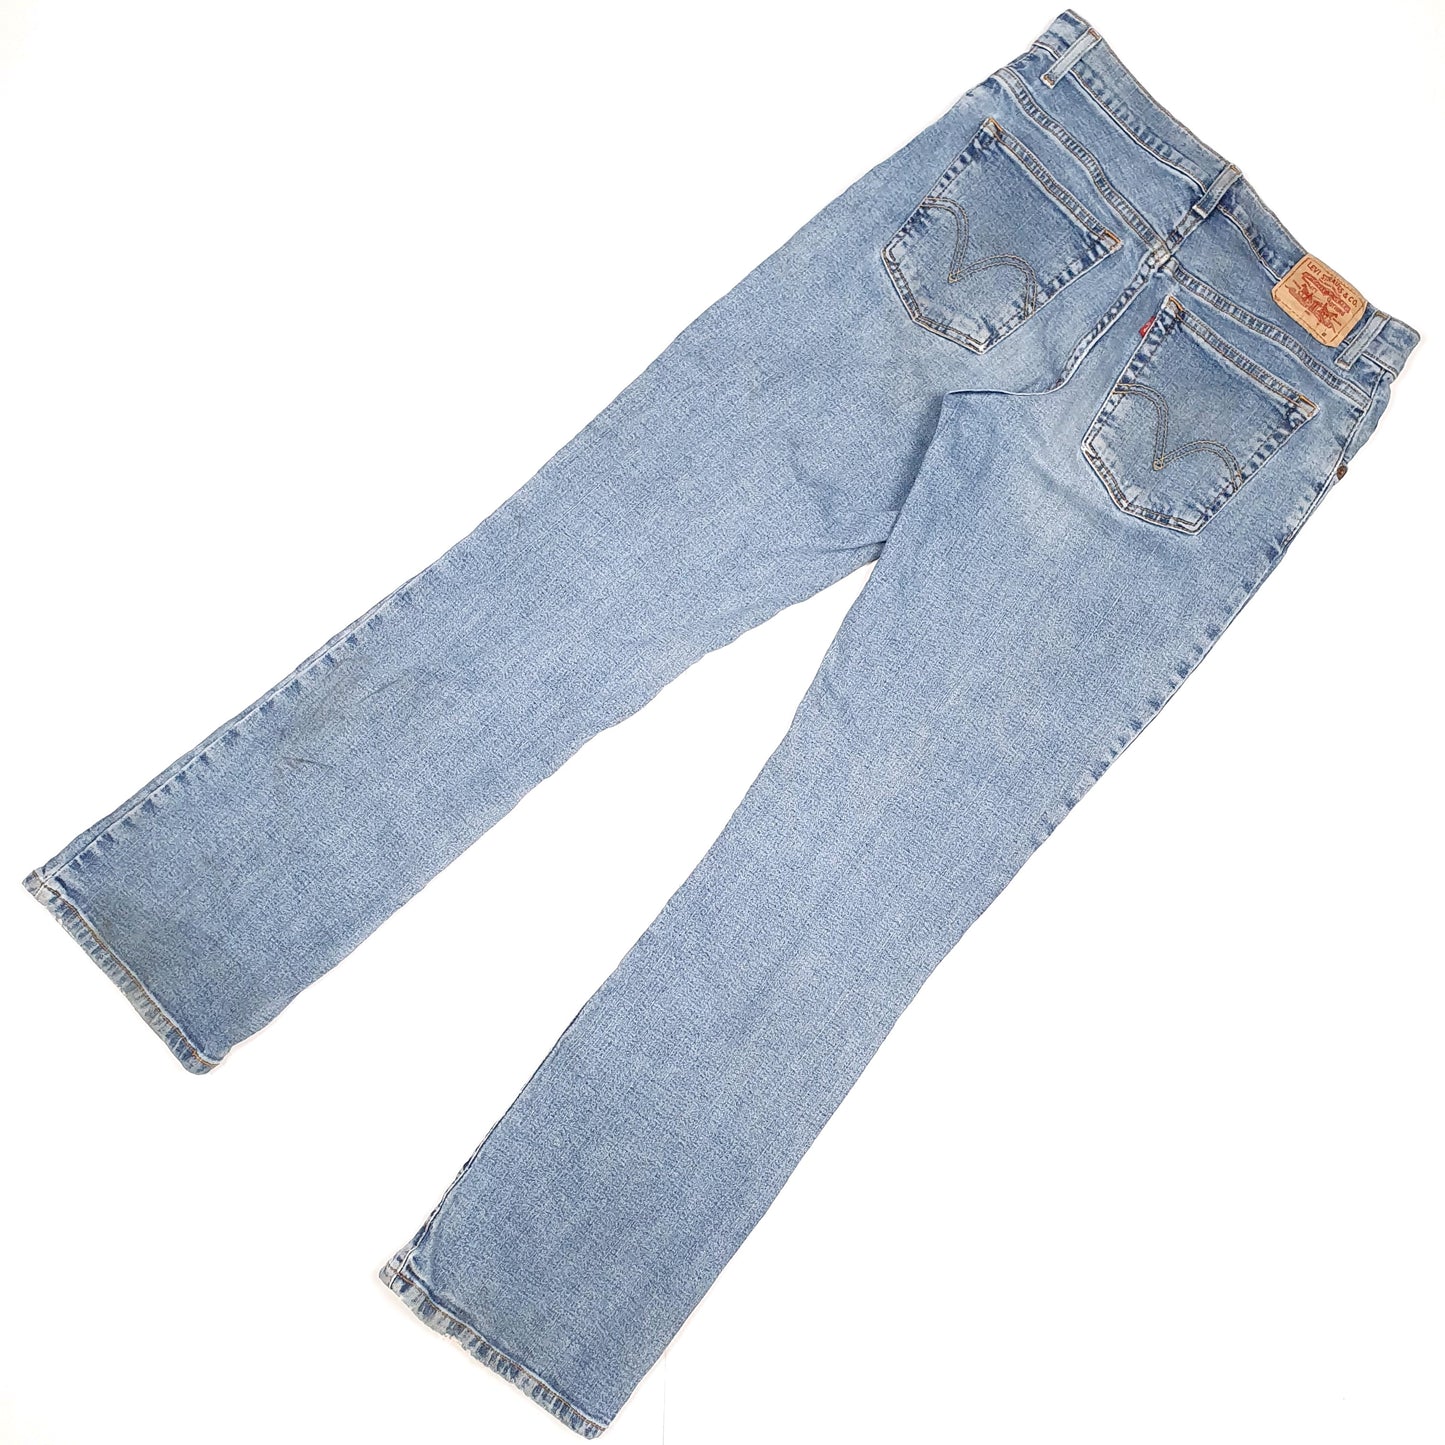 Levis 550 Relaxed Fit Jeans UK12